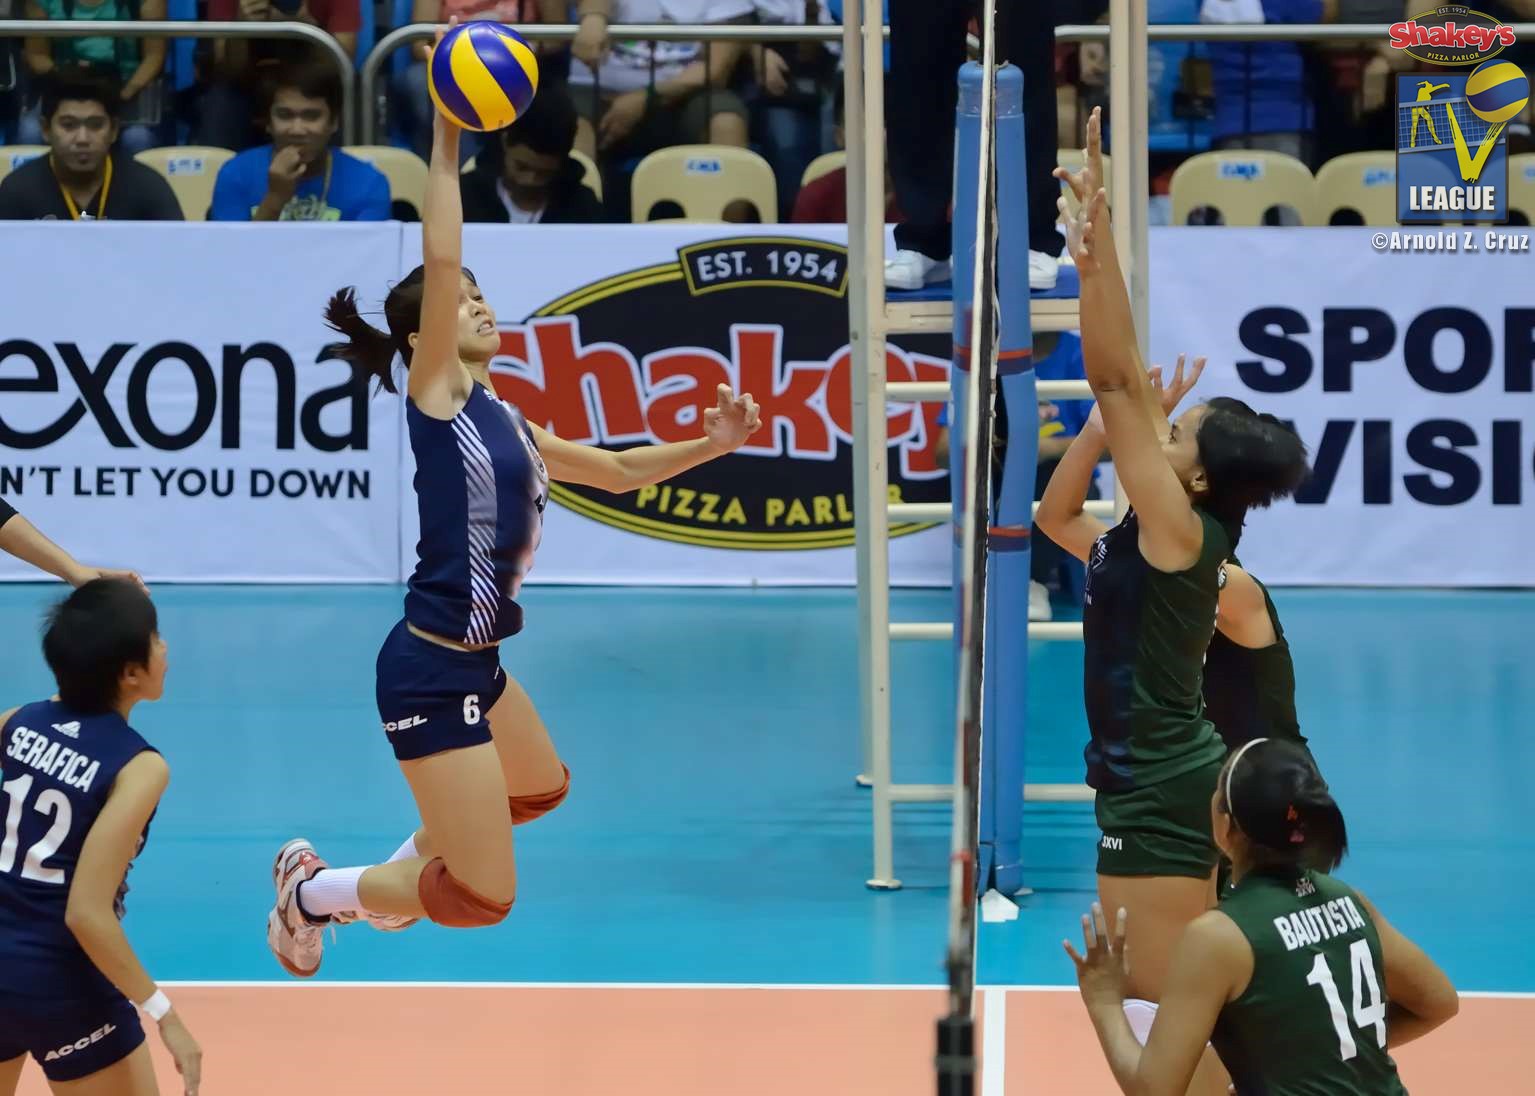 Shakeys V-League Open Army, Cagayan Valley trounce foes to stay undefeated